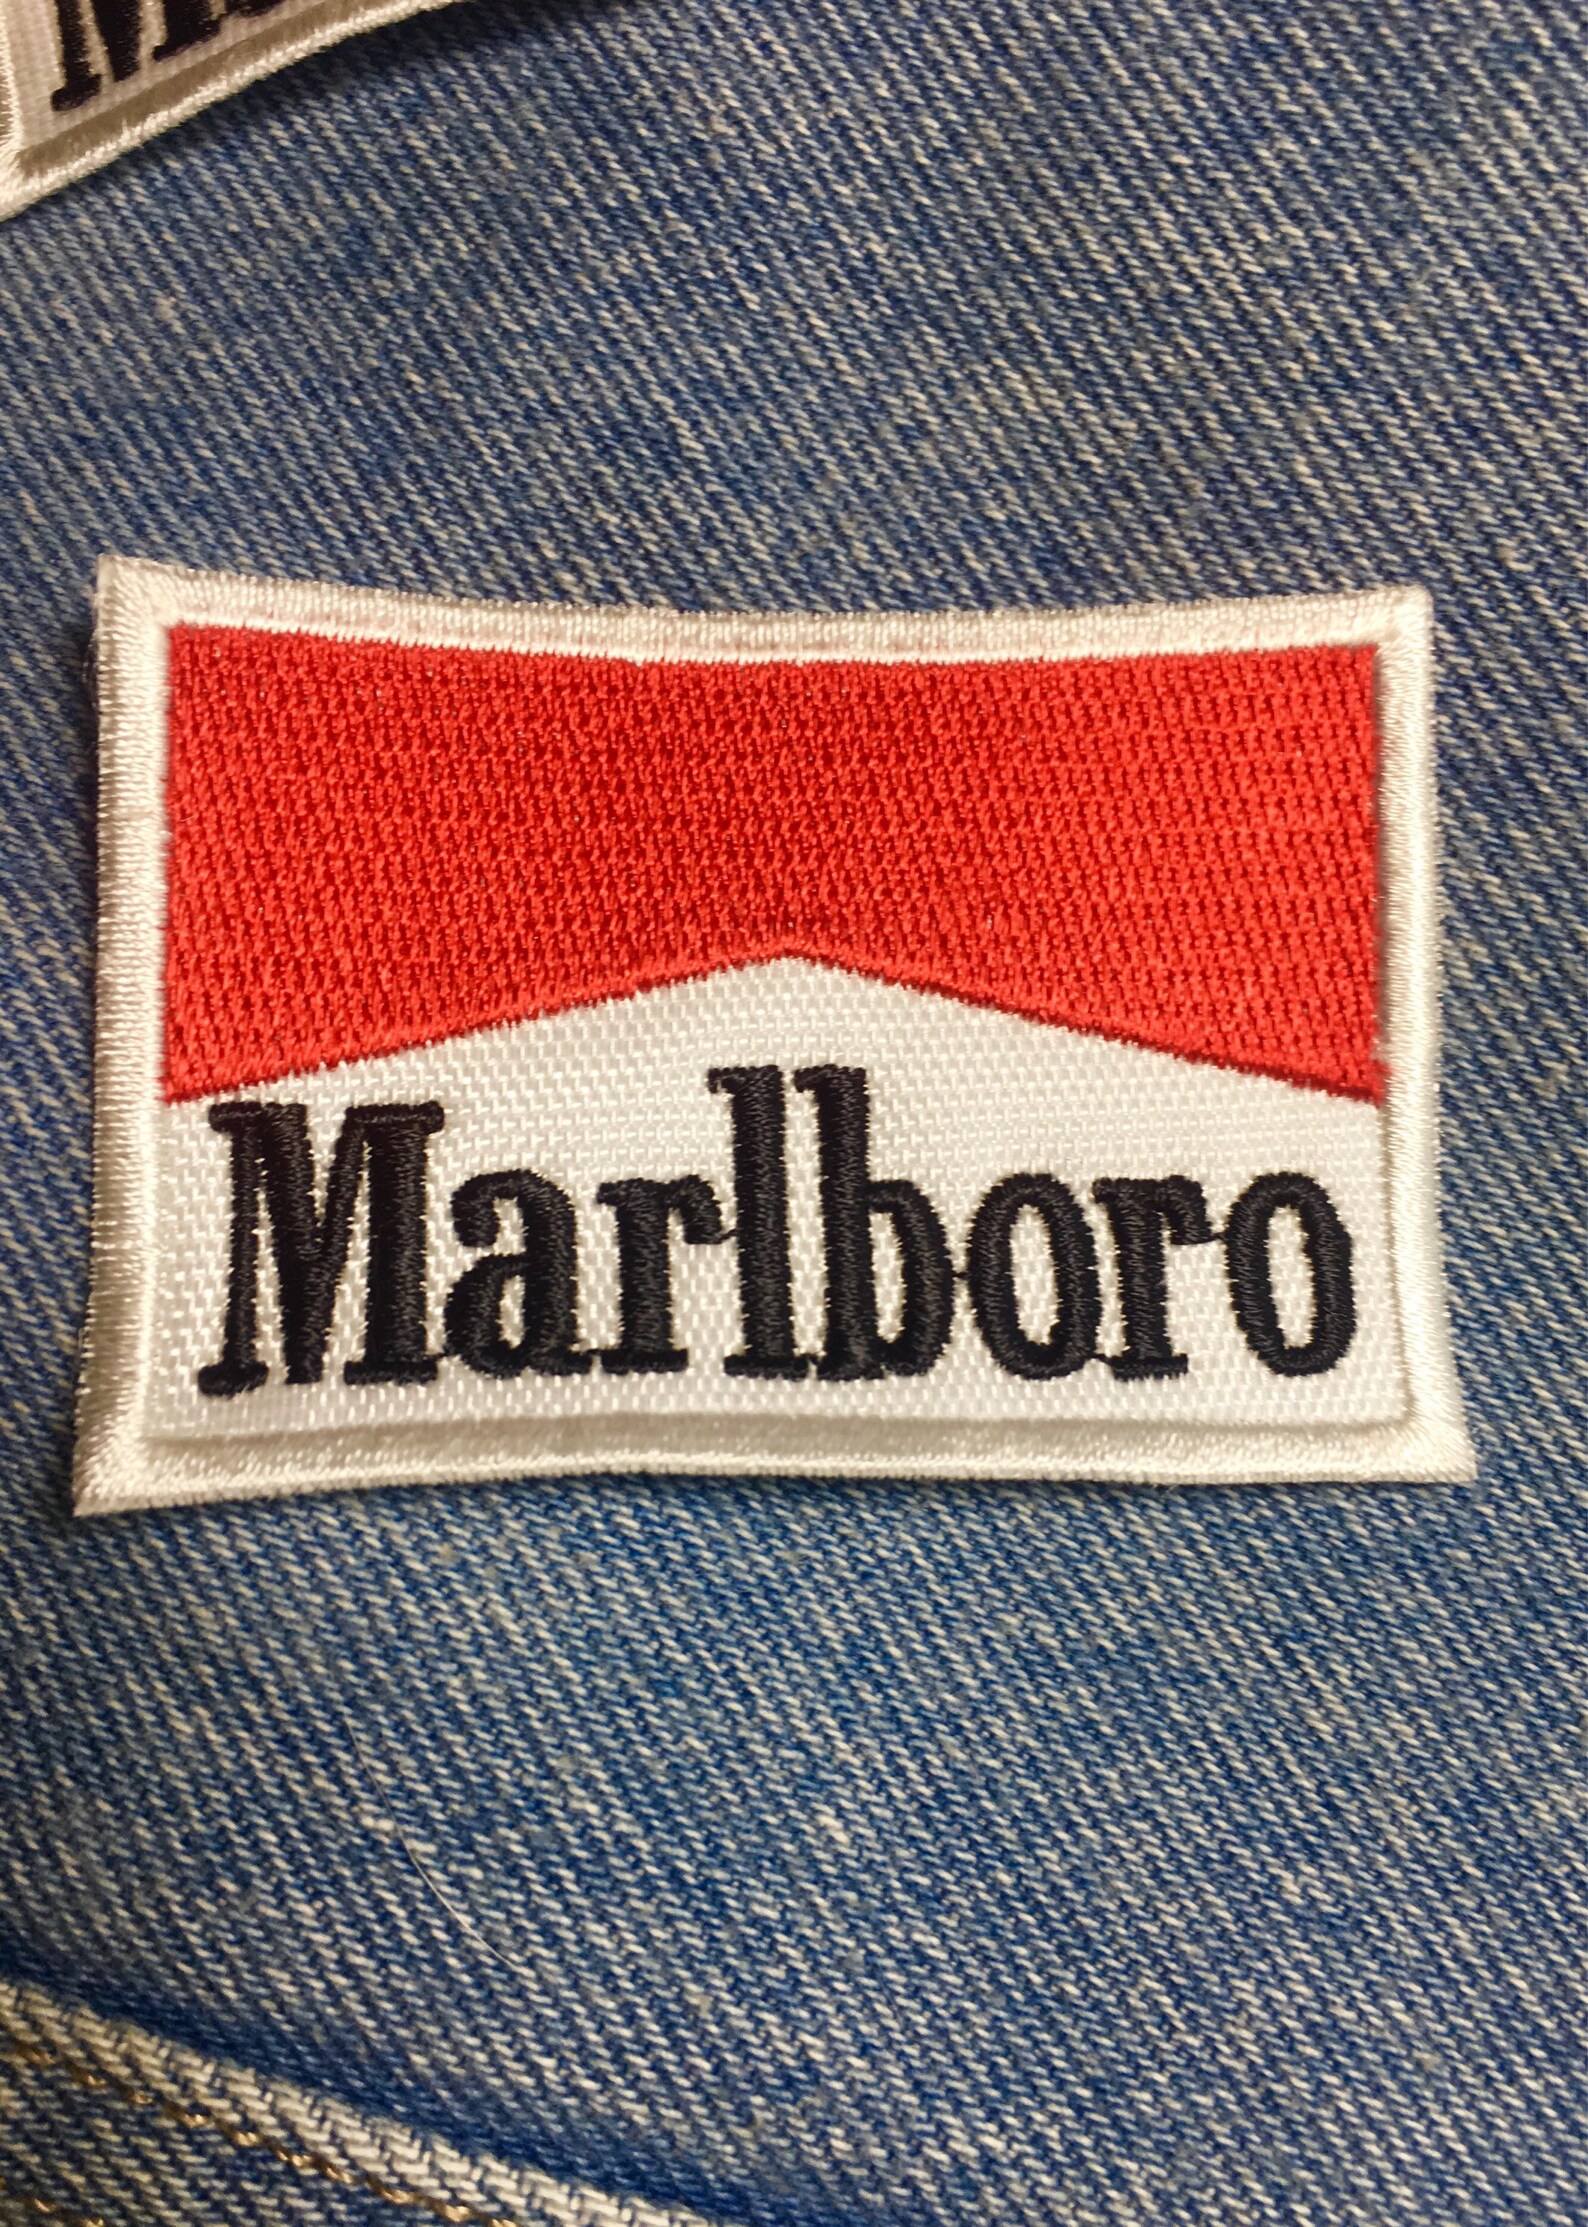 90s Marlboro Patch // Embroidered Marlboro Patch // Red Black | Etsy